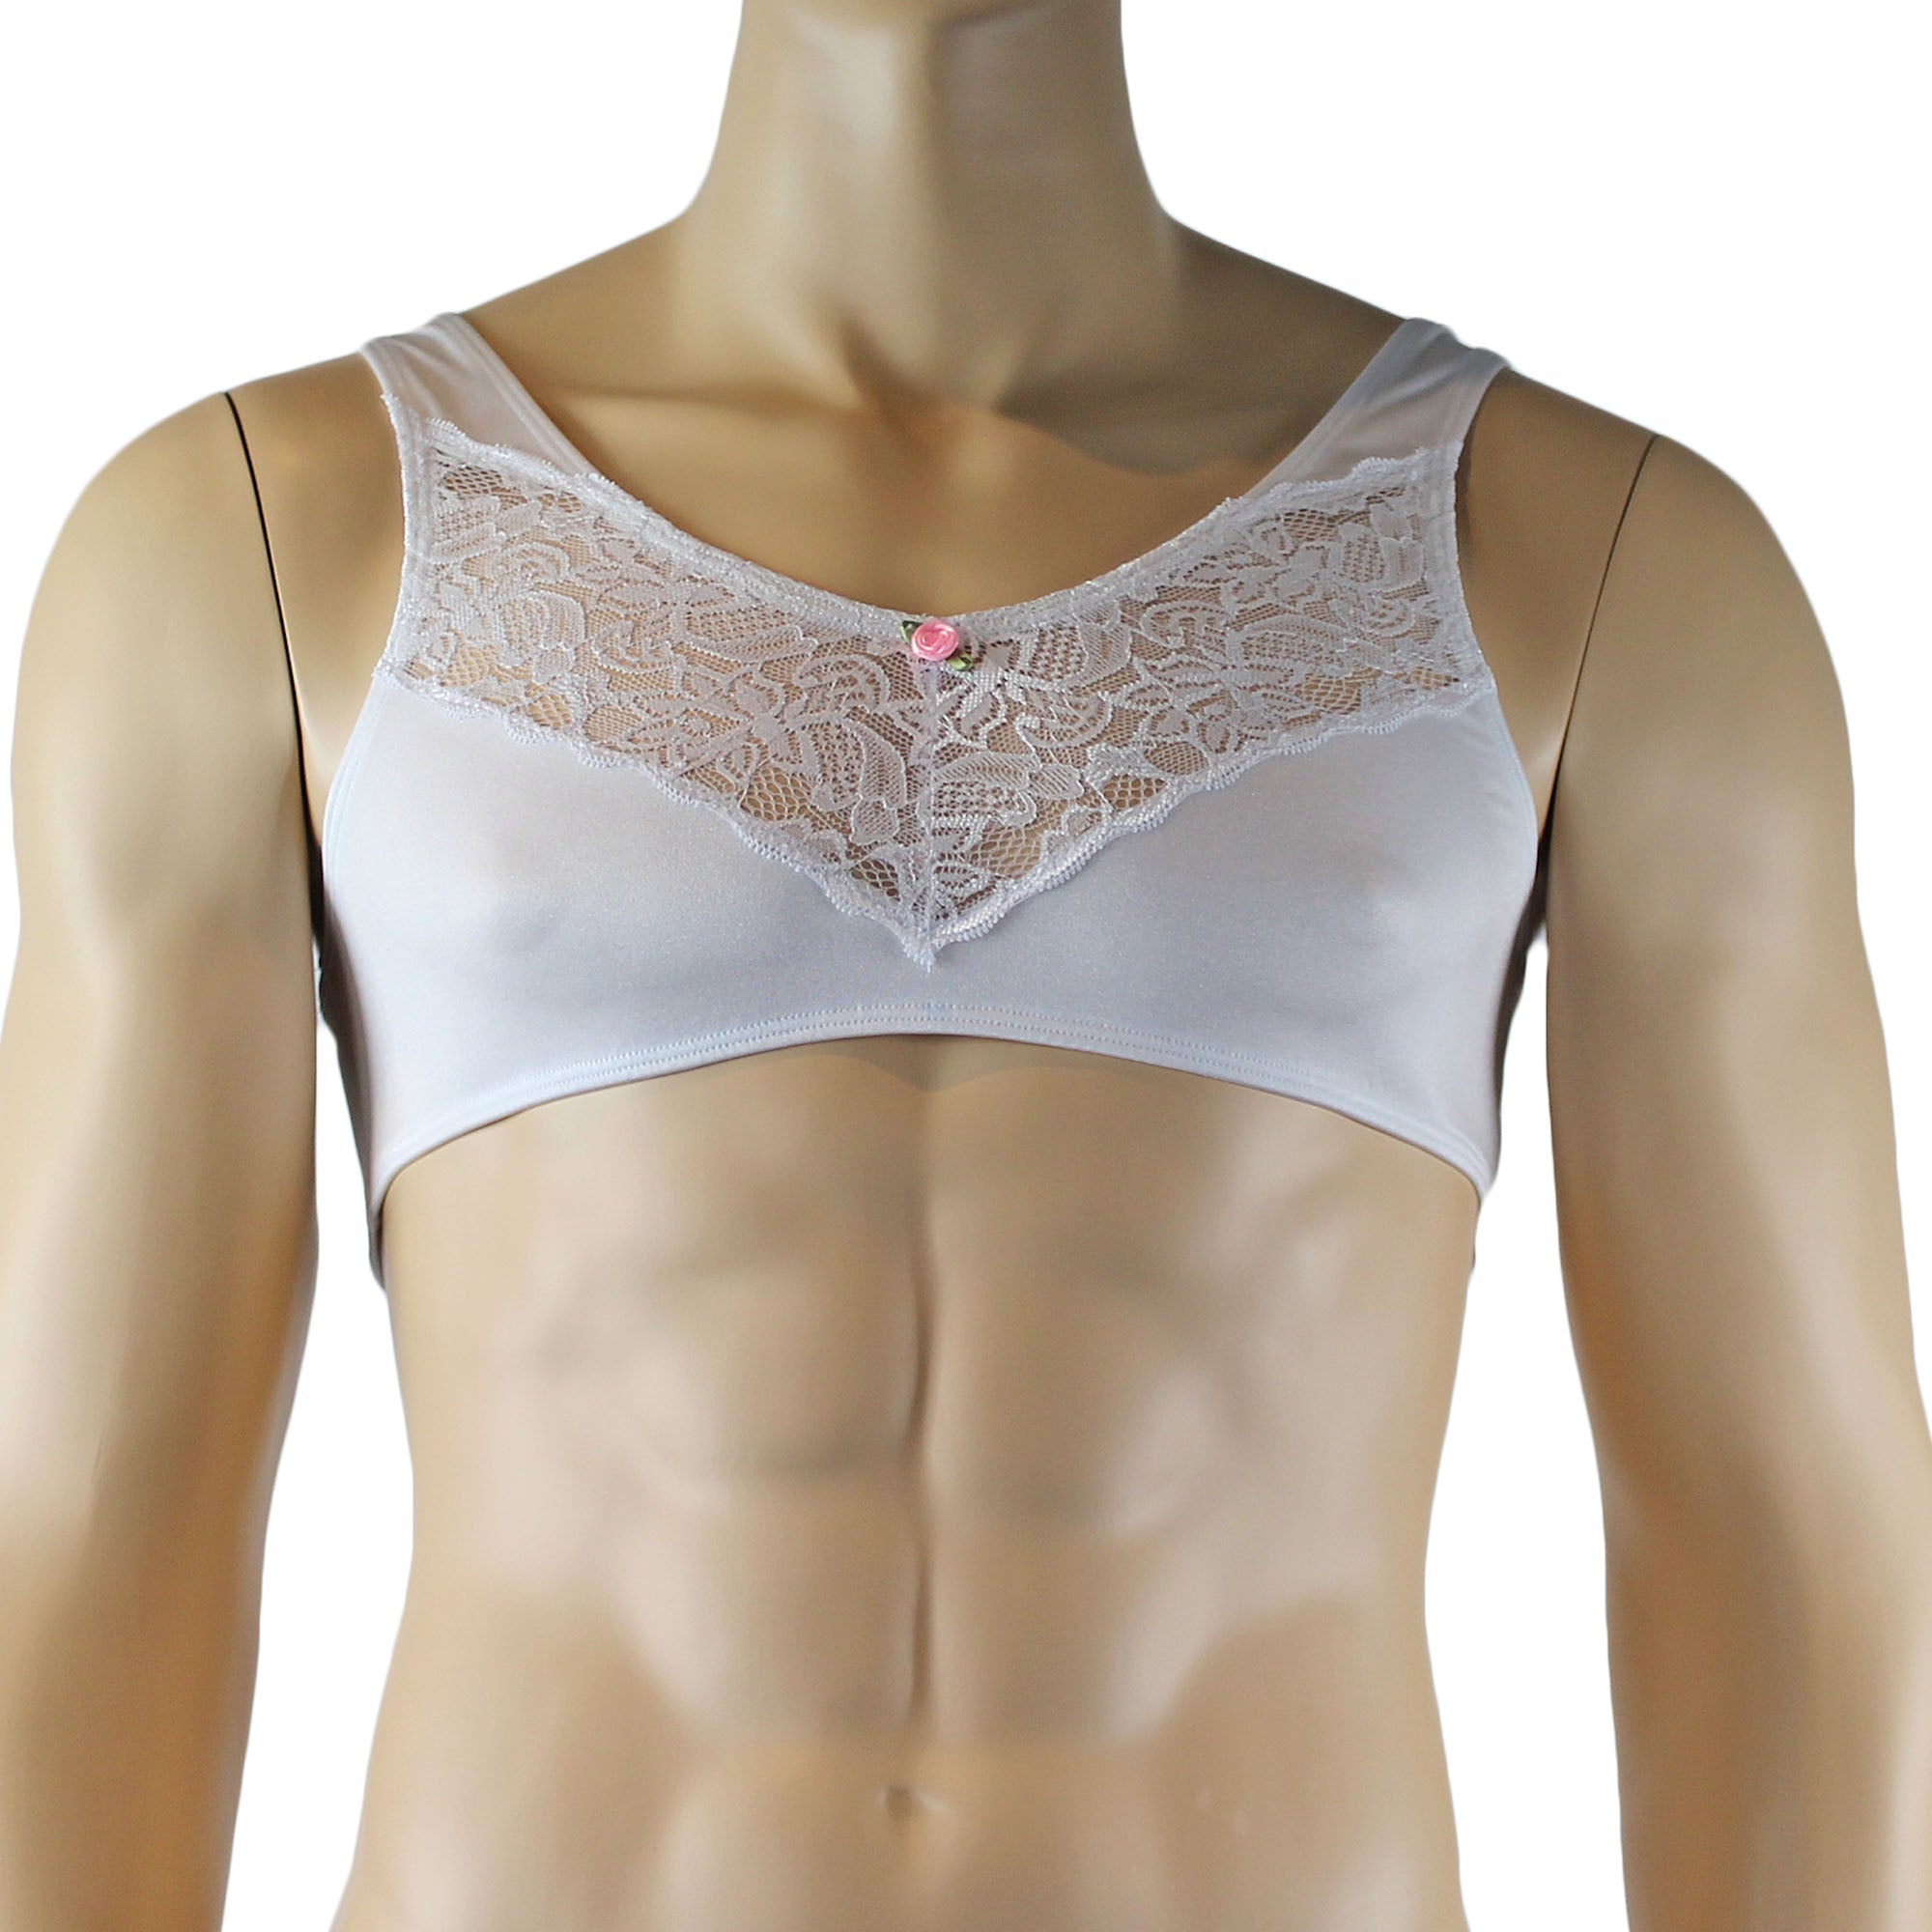 Male Penny Lingerie Bra Top with V Lace front, G string & Garterbelt White